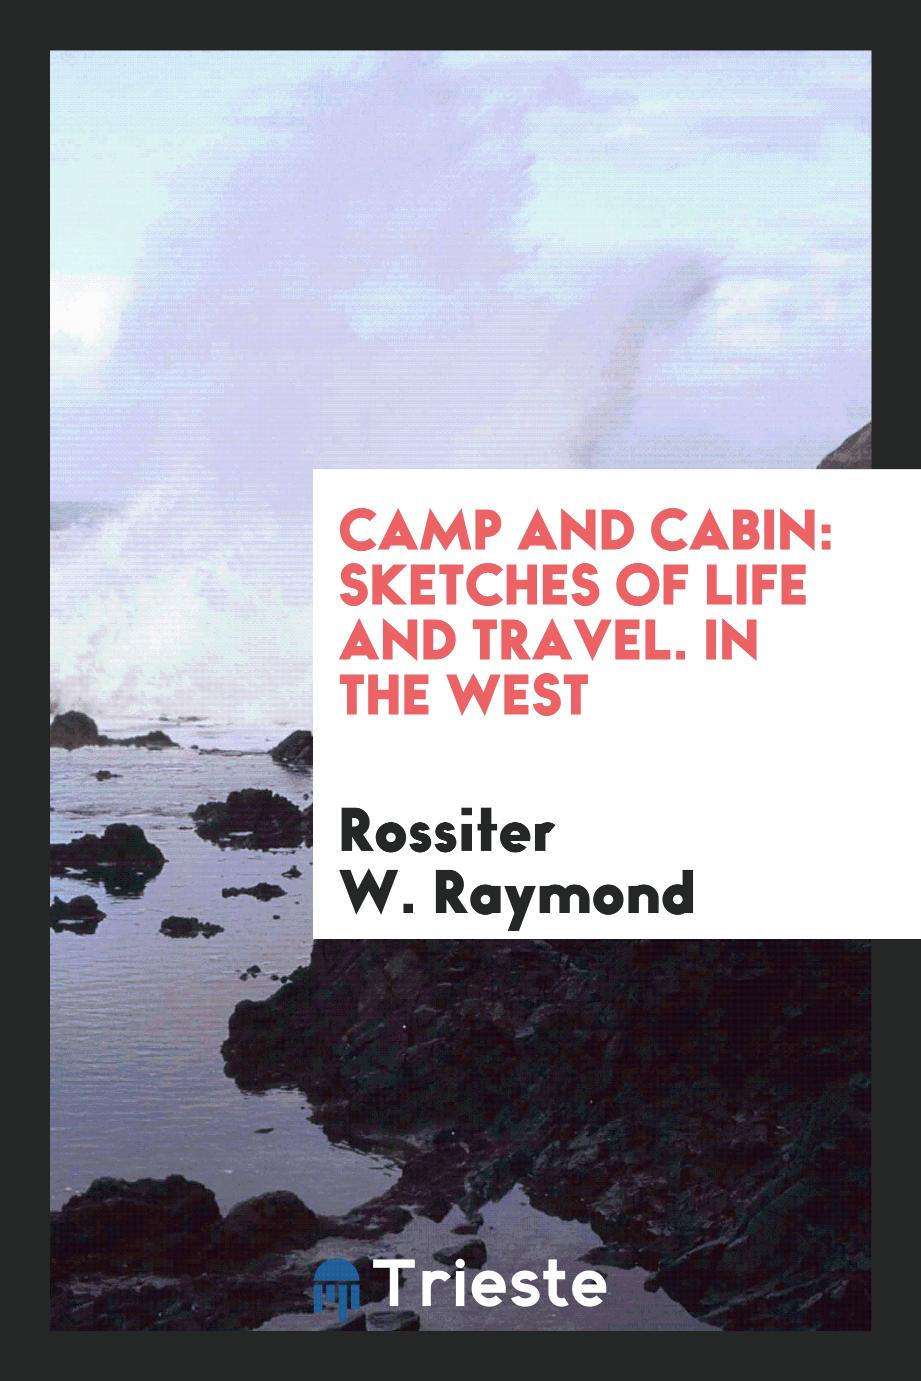 Camp and cabin: Sketches of life and travel. In the west